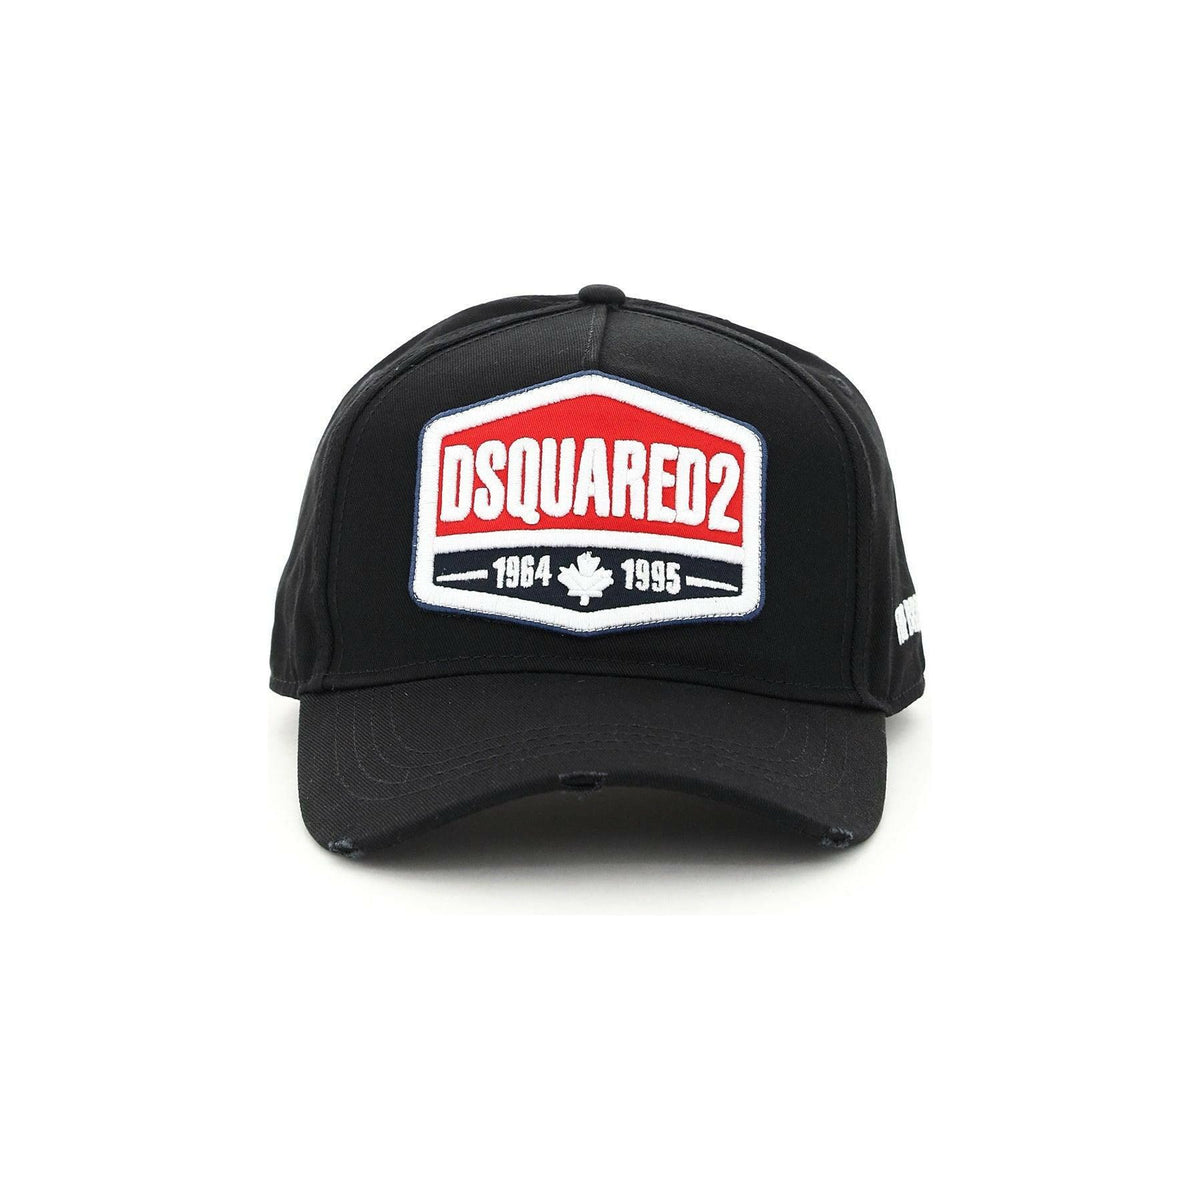 DSQUARED2 - Black Baseball Cap With Embroidered Patch - JOHN JULIA